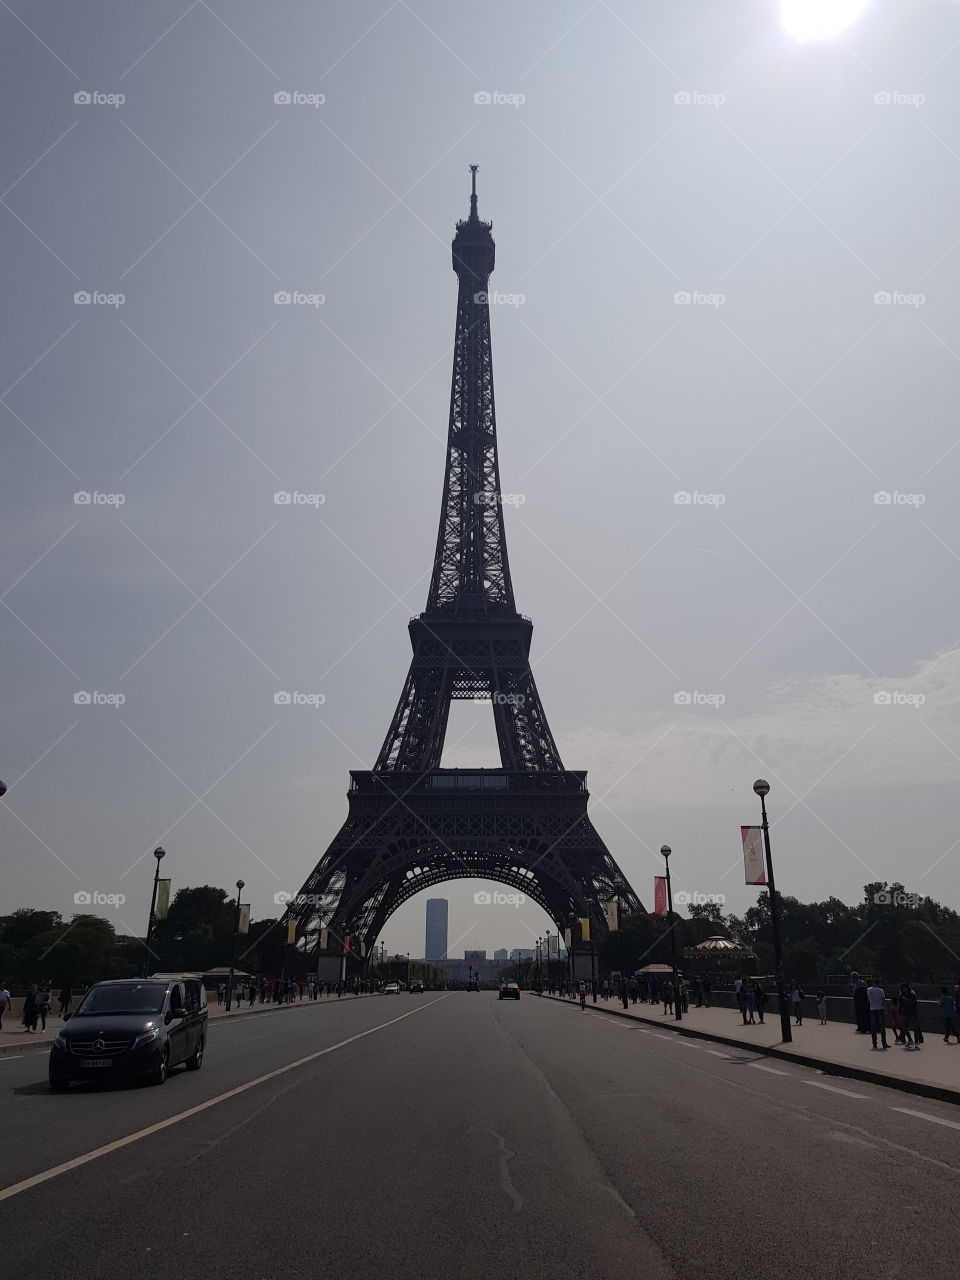 in the middle of the road in front of the eiffal tower